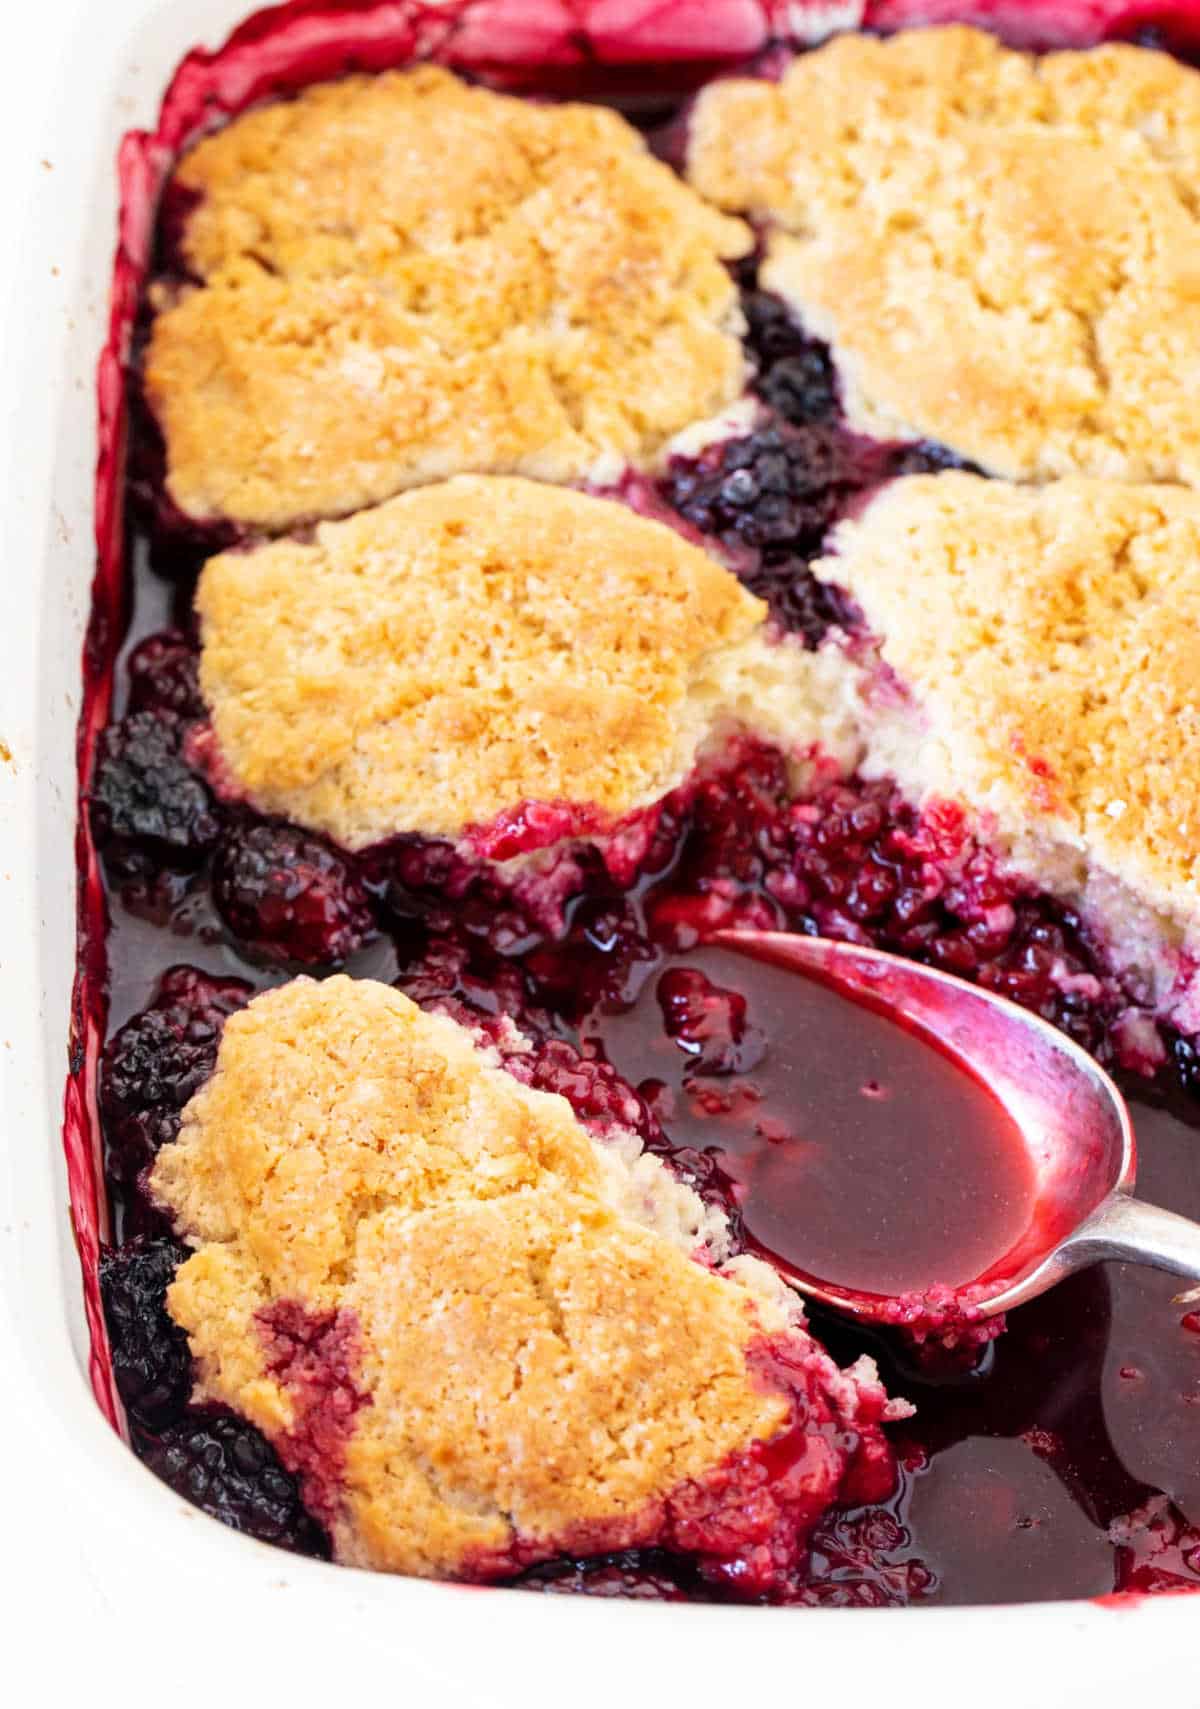 Baked blackberry cobbler with silver spoon inside.